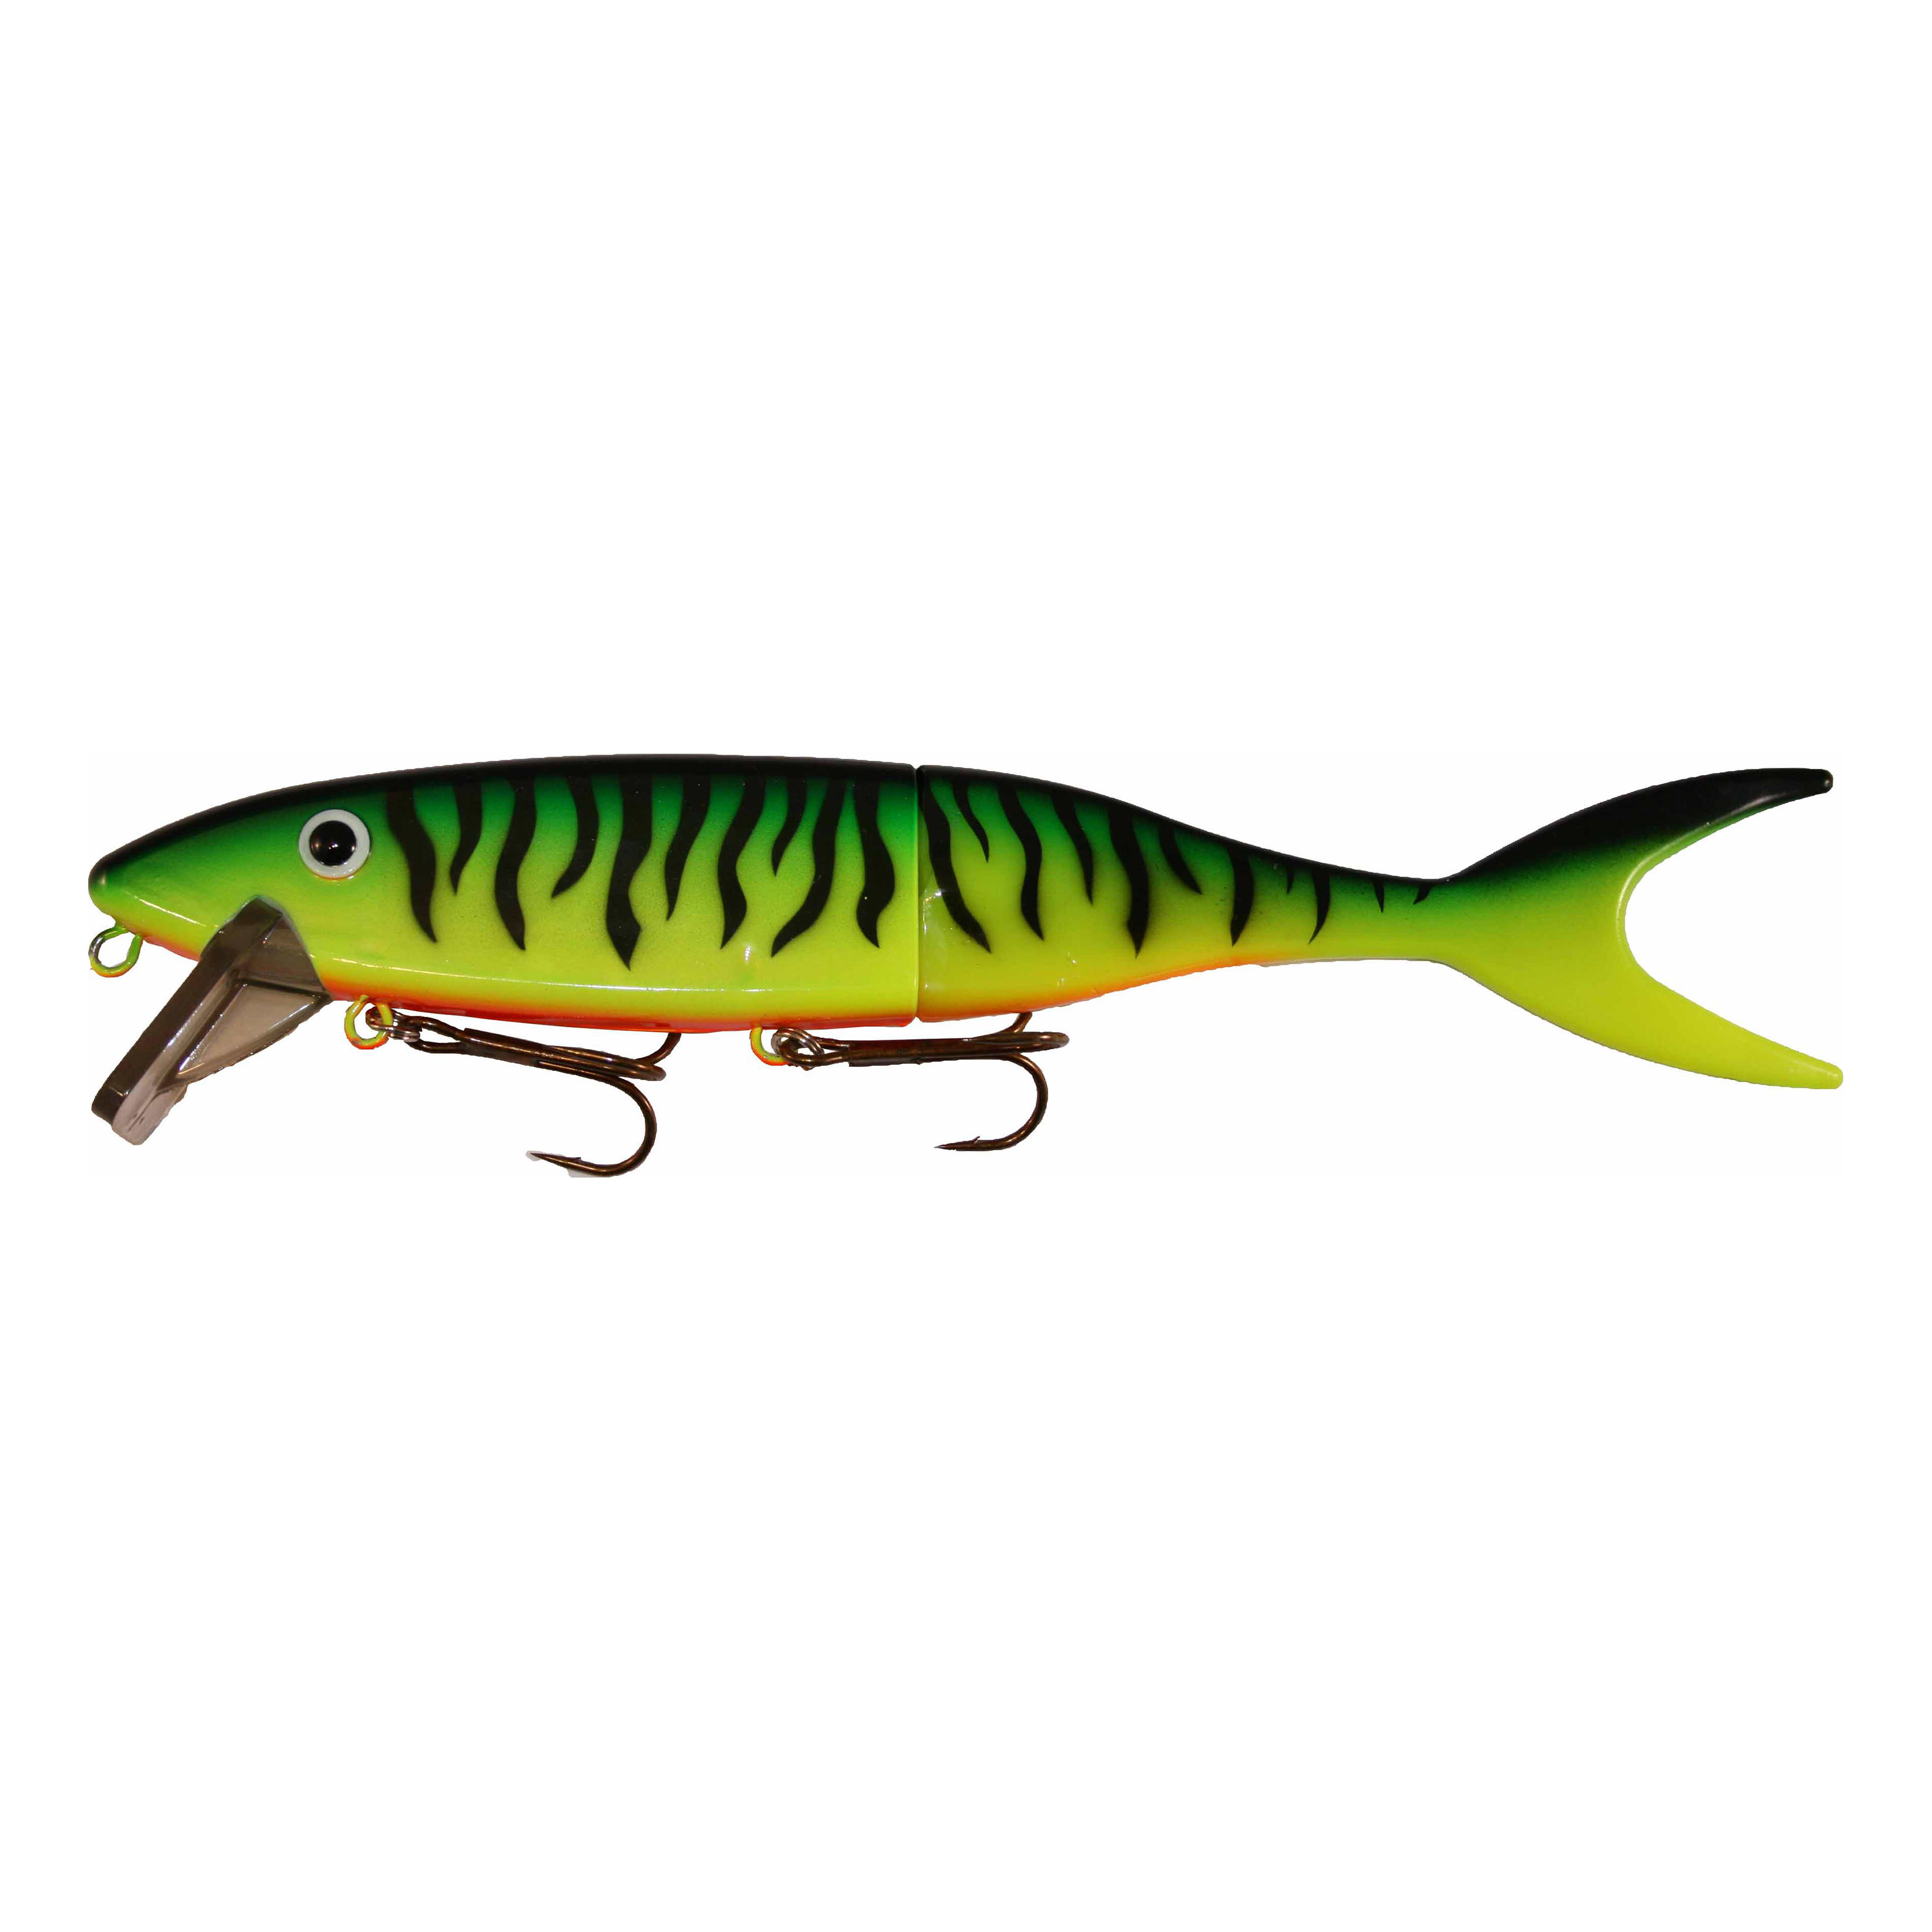 UFISH Northern Pike Lures Muskie Robotic Electronic Fishing Lure for Bass  Musky